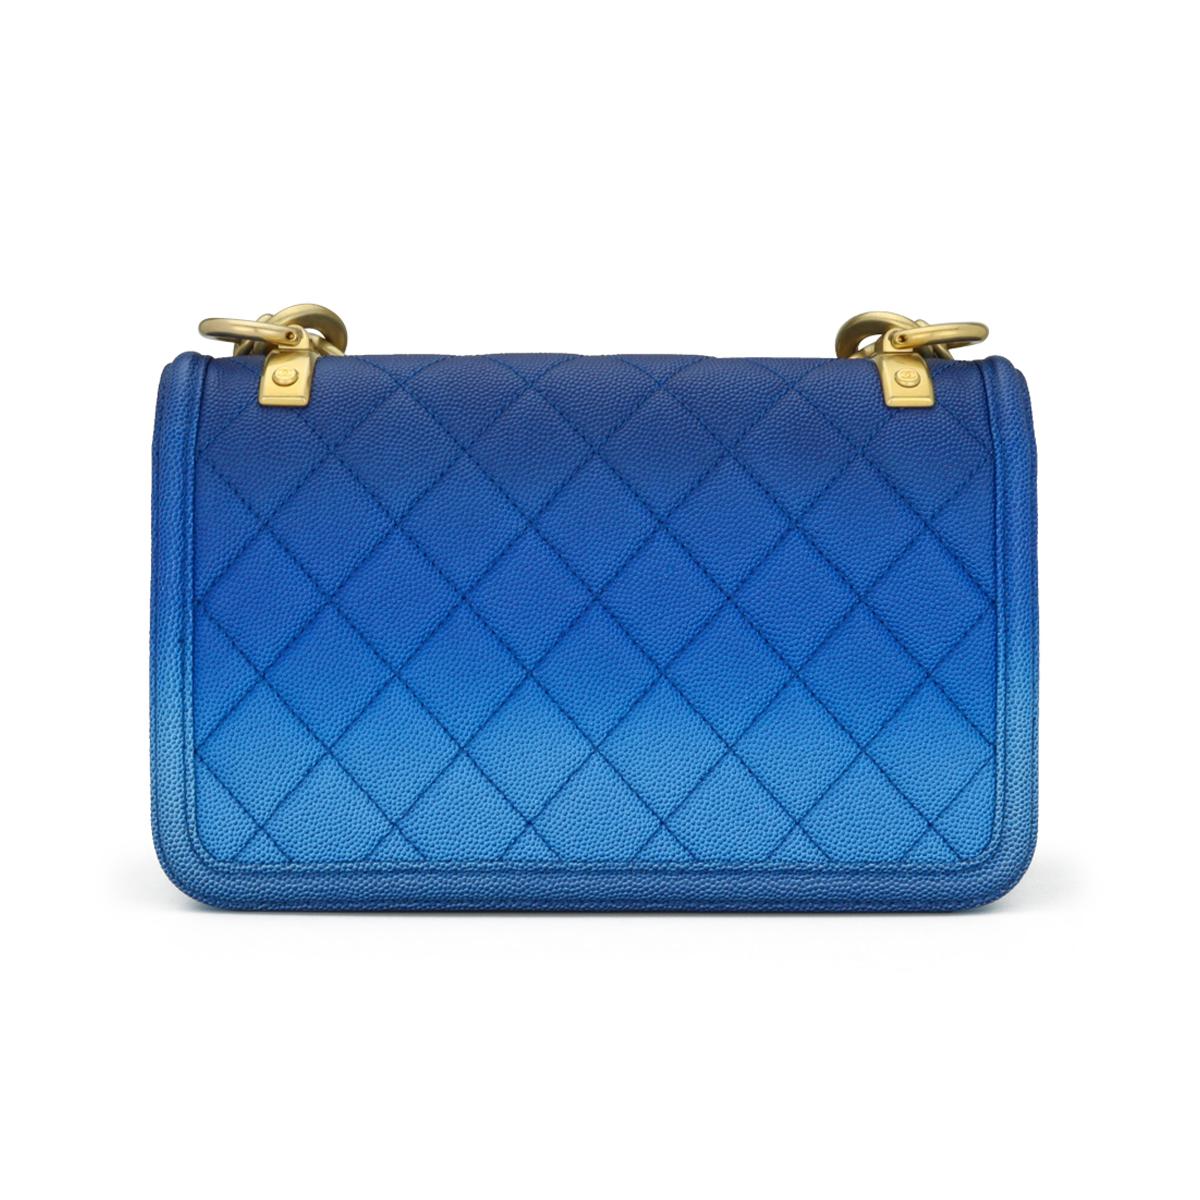 CHANEL Sunset On The Sea Flap Bag Blue Caviar with Brushed Gold Hardware 2019 In Excellent Condition For Sale In Huddersfield, GB